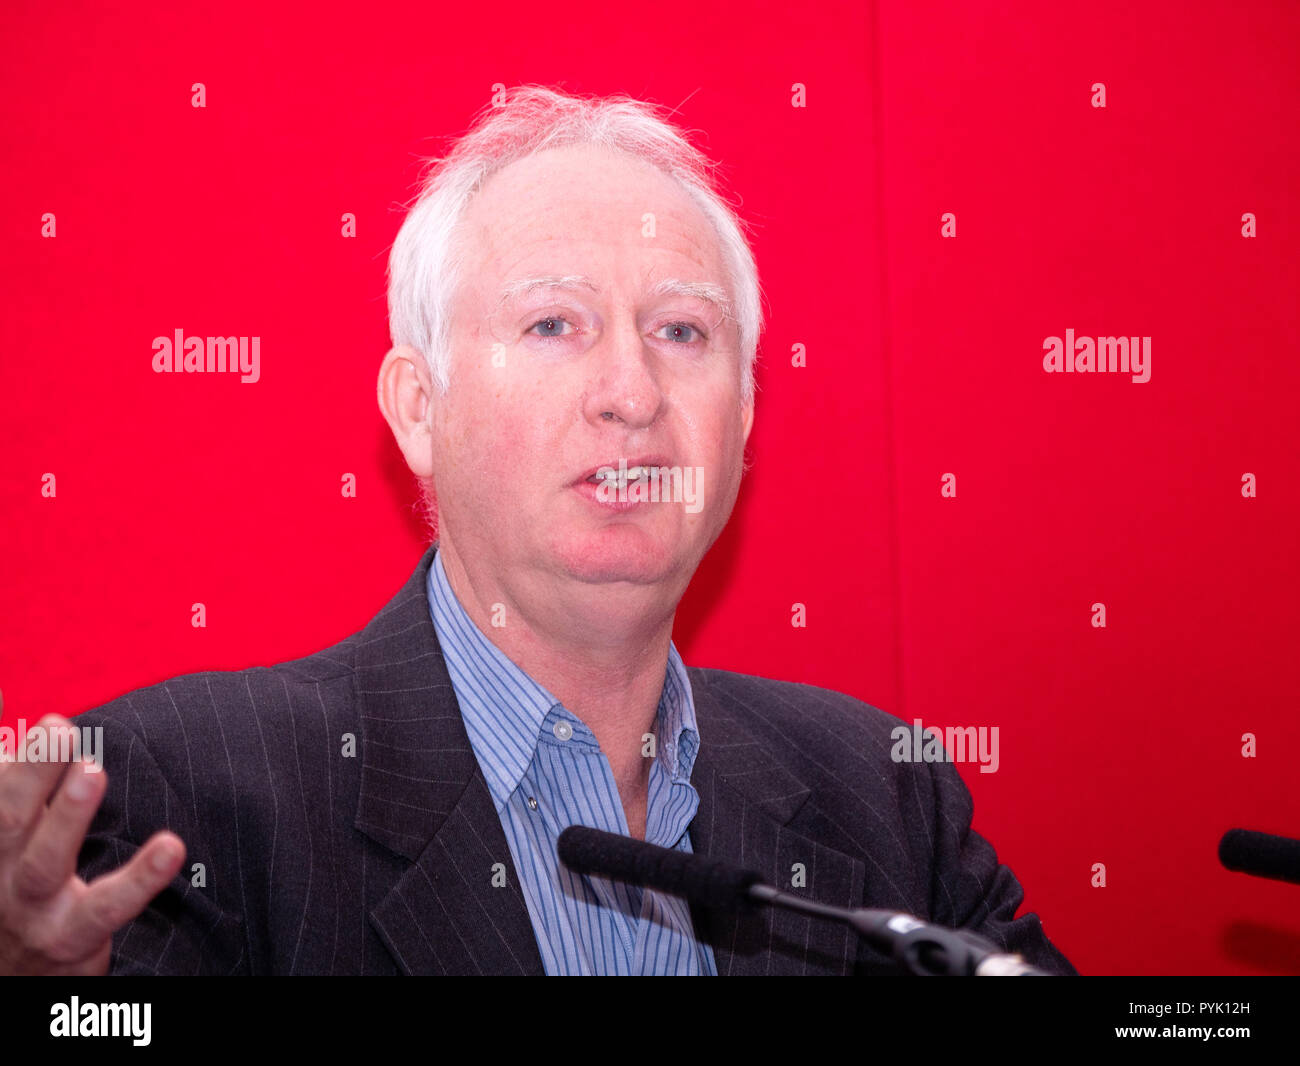 Norwich, UK. 28th October 2018 the British Labour Party holds its Eastern regional conference in Norwich where Daniel Zeichner addresses the conference Credit: William Edwards/Alamy Live News Stock Photo